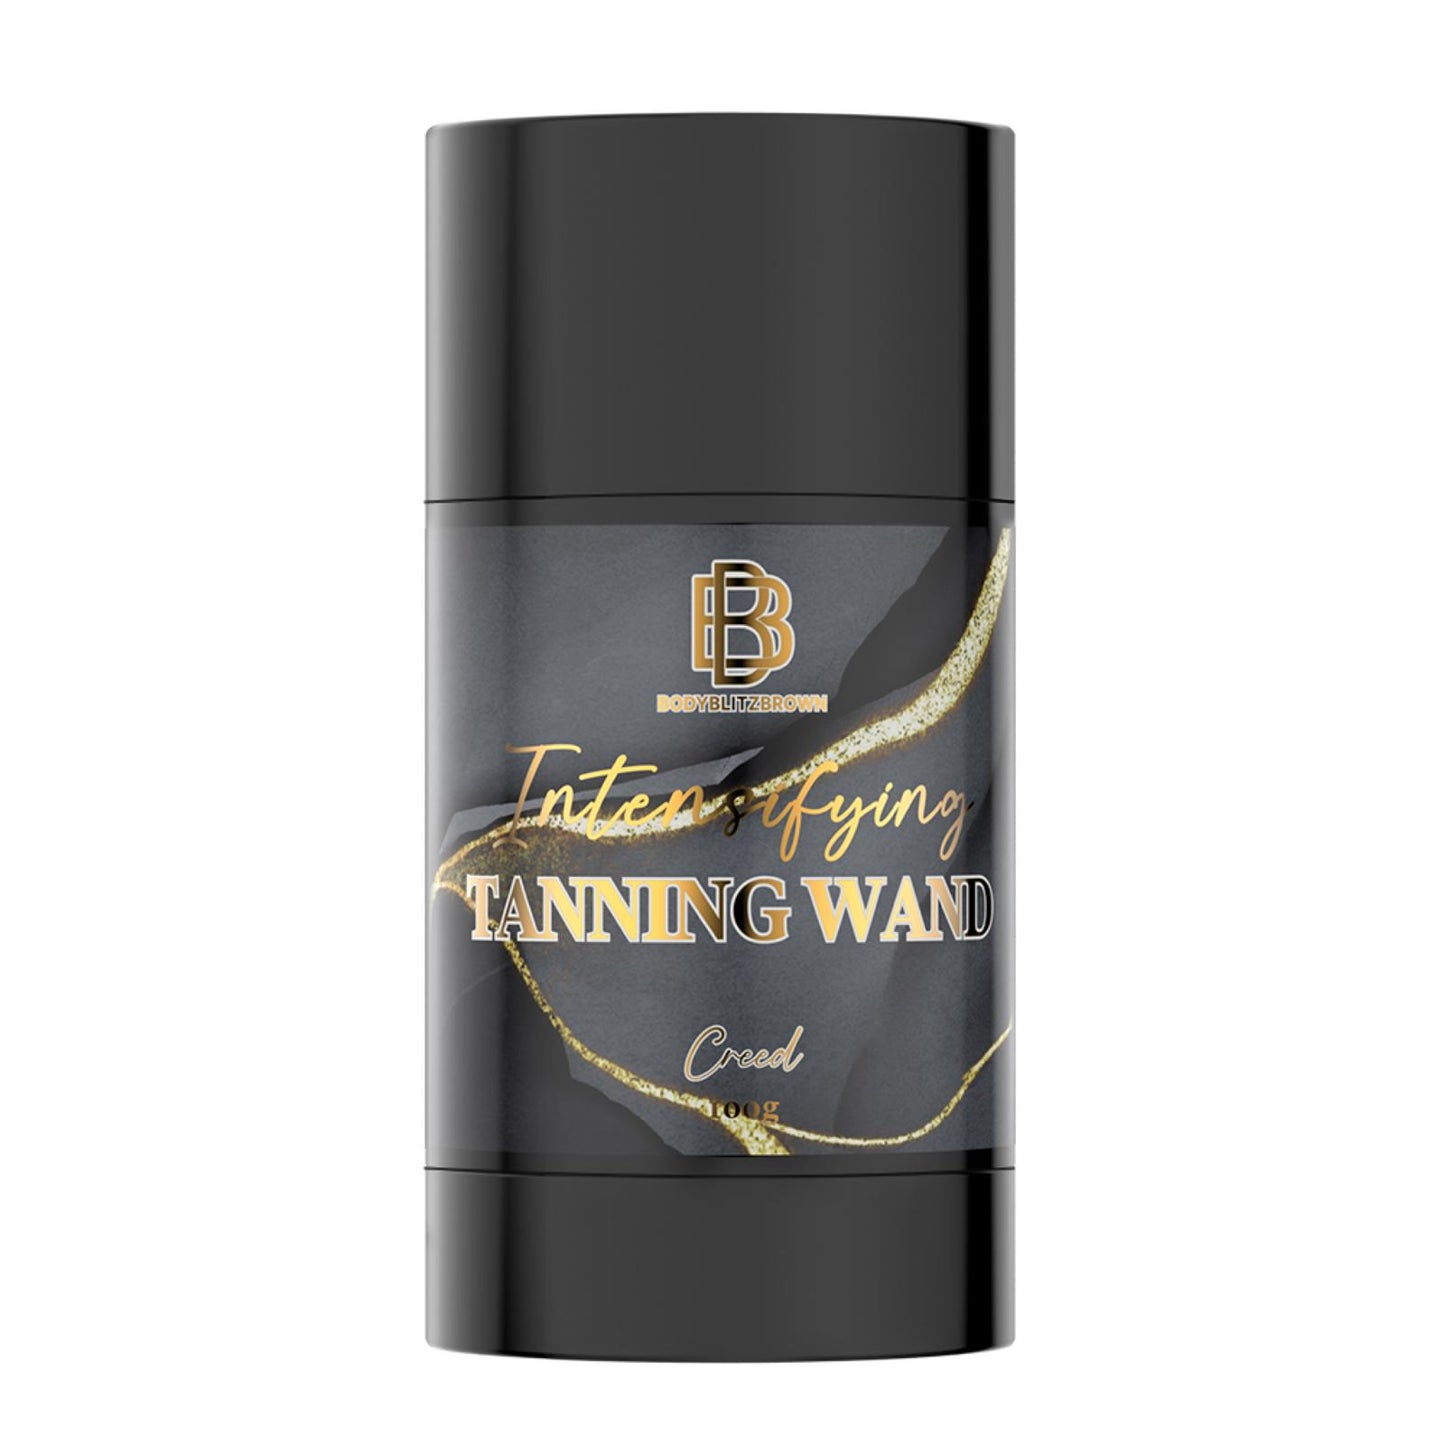 20x Tanning Wands Creed